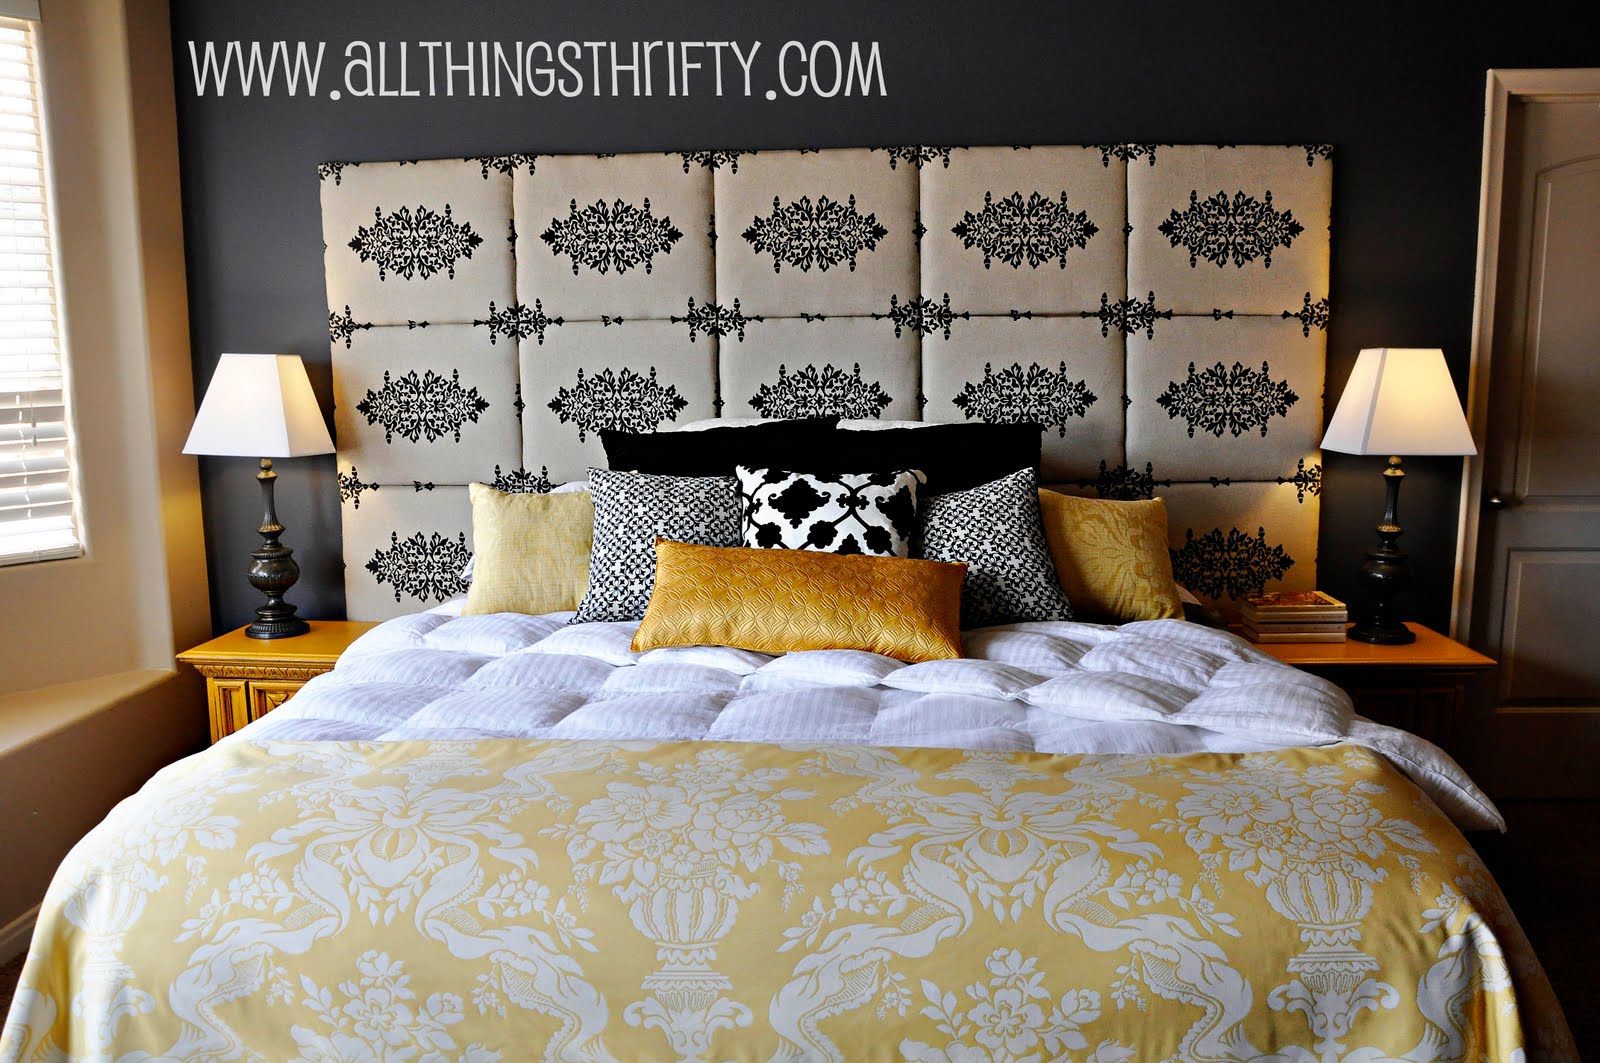 diy headboard apholstered pillow sqaure headboard allthingsthrifty